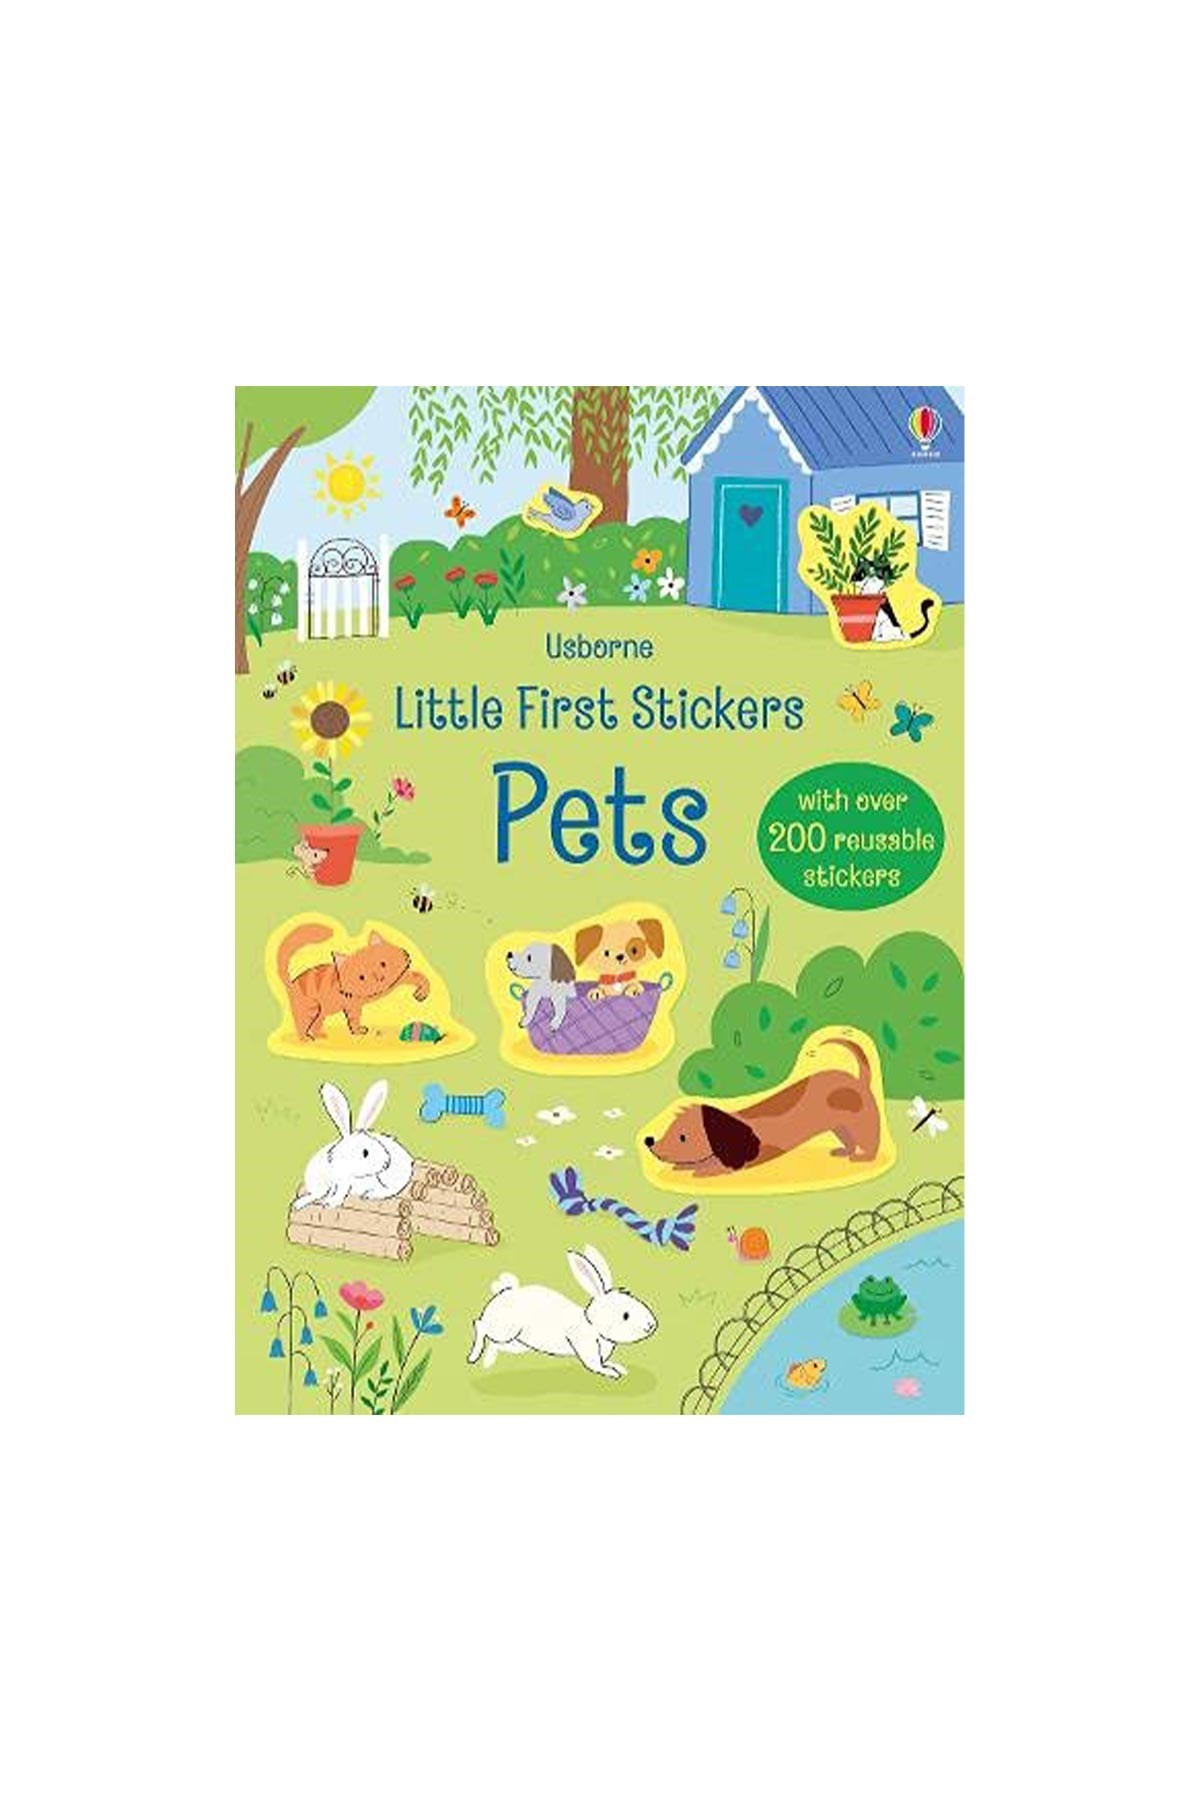 The Usborne Little First Stickers Pets